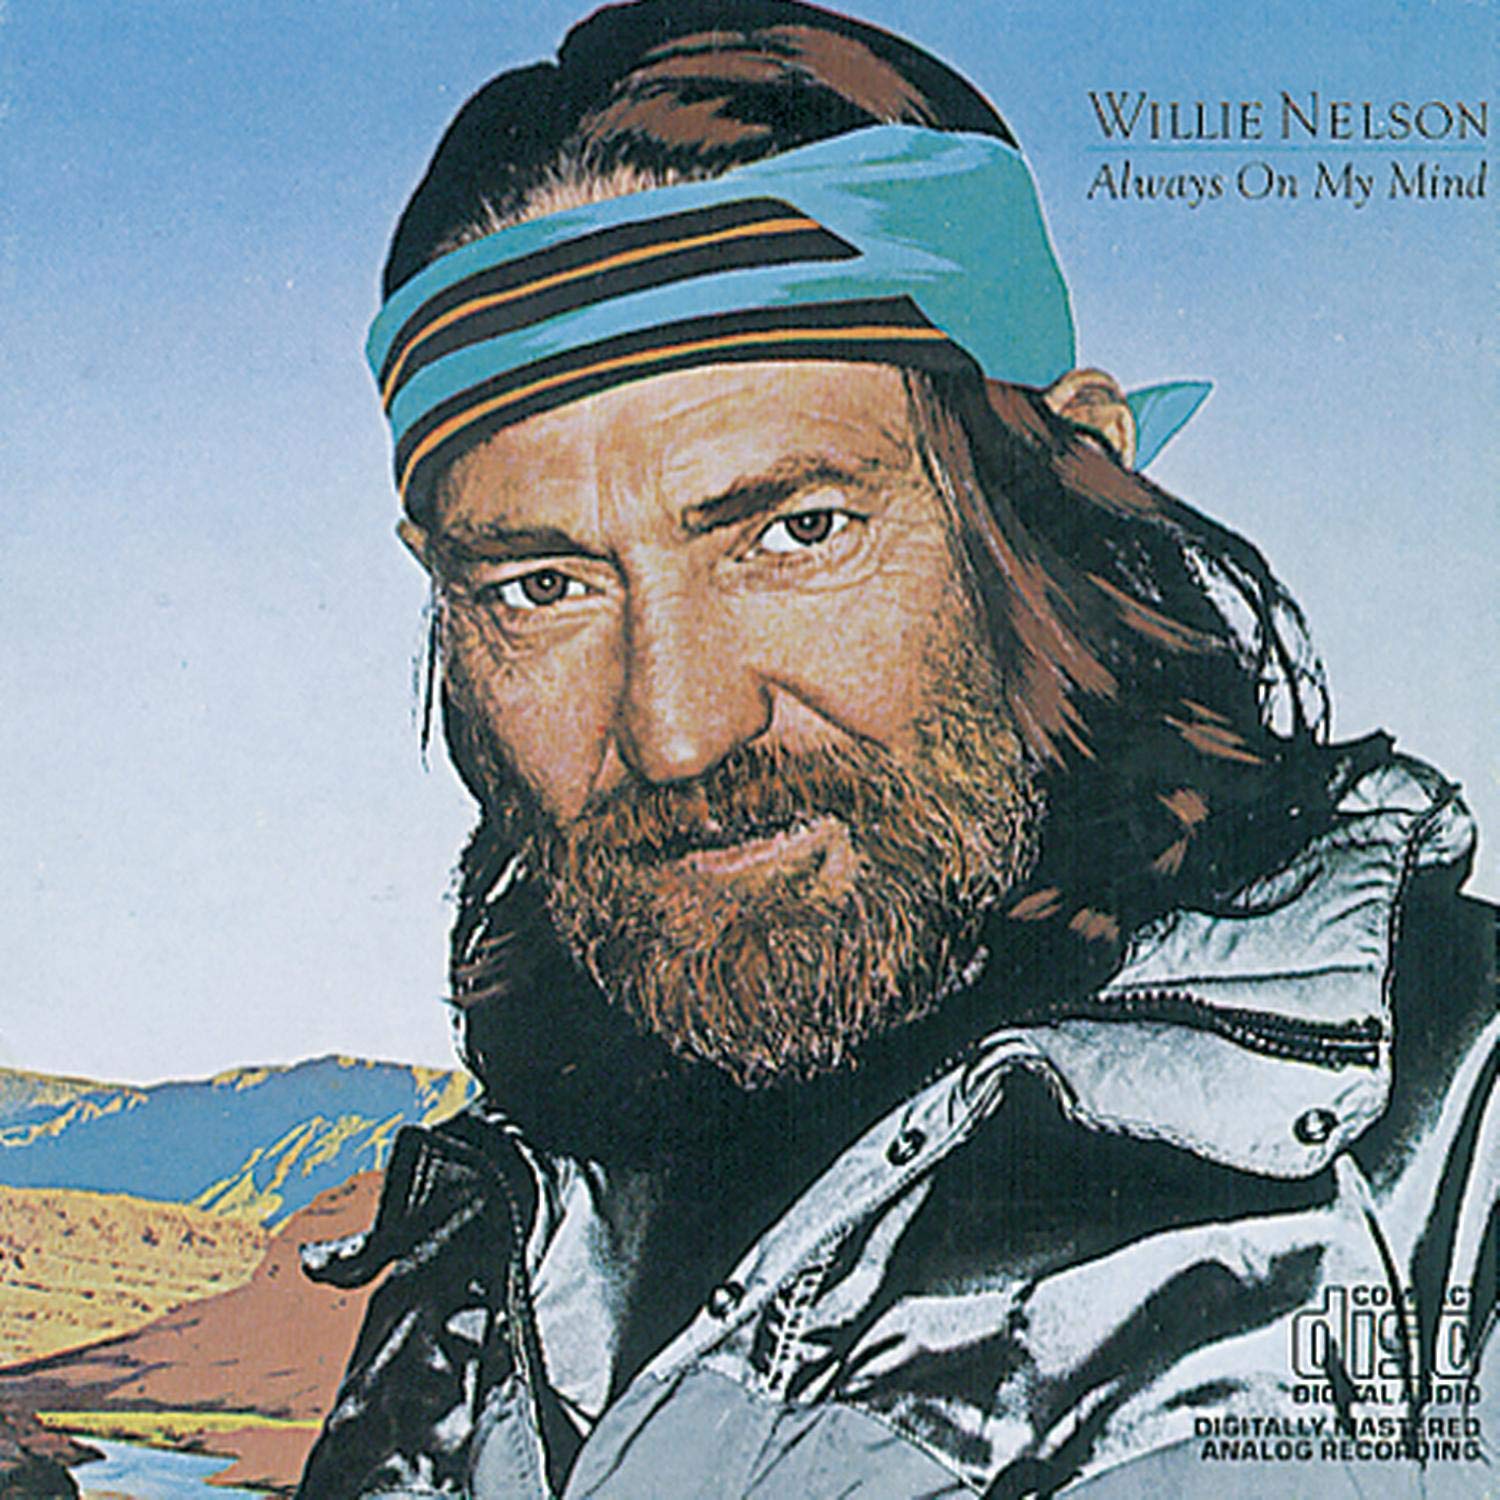 Art for Always On My Mind by Willie Nelson